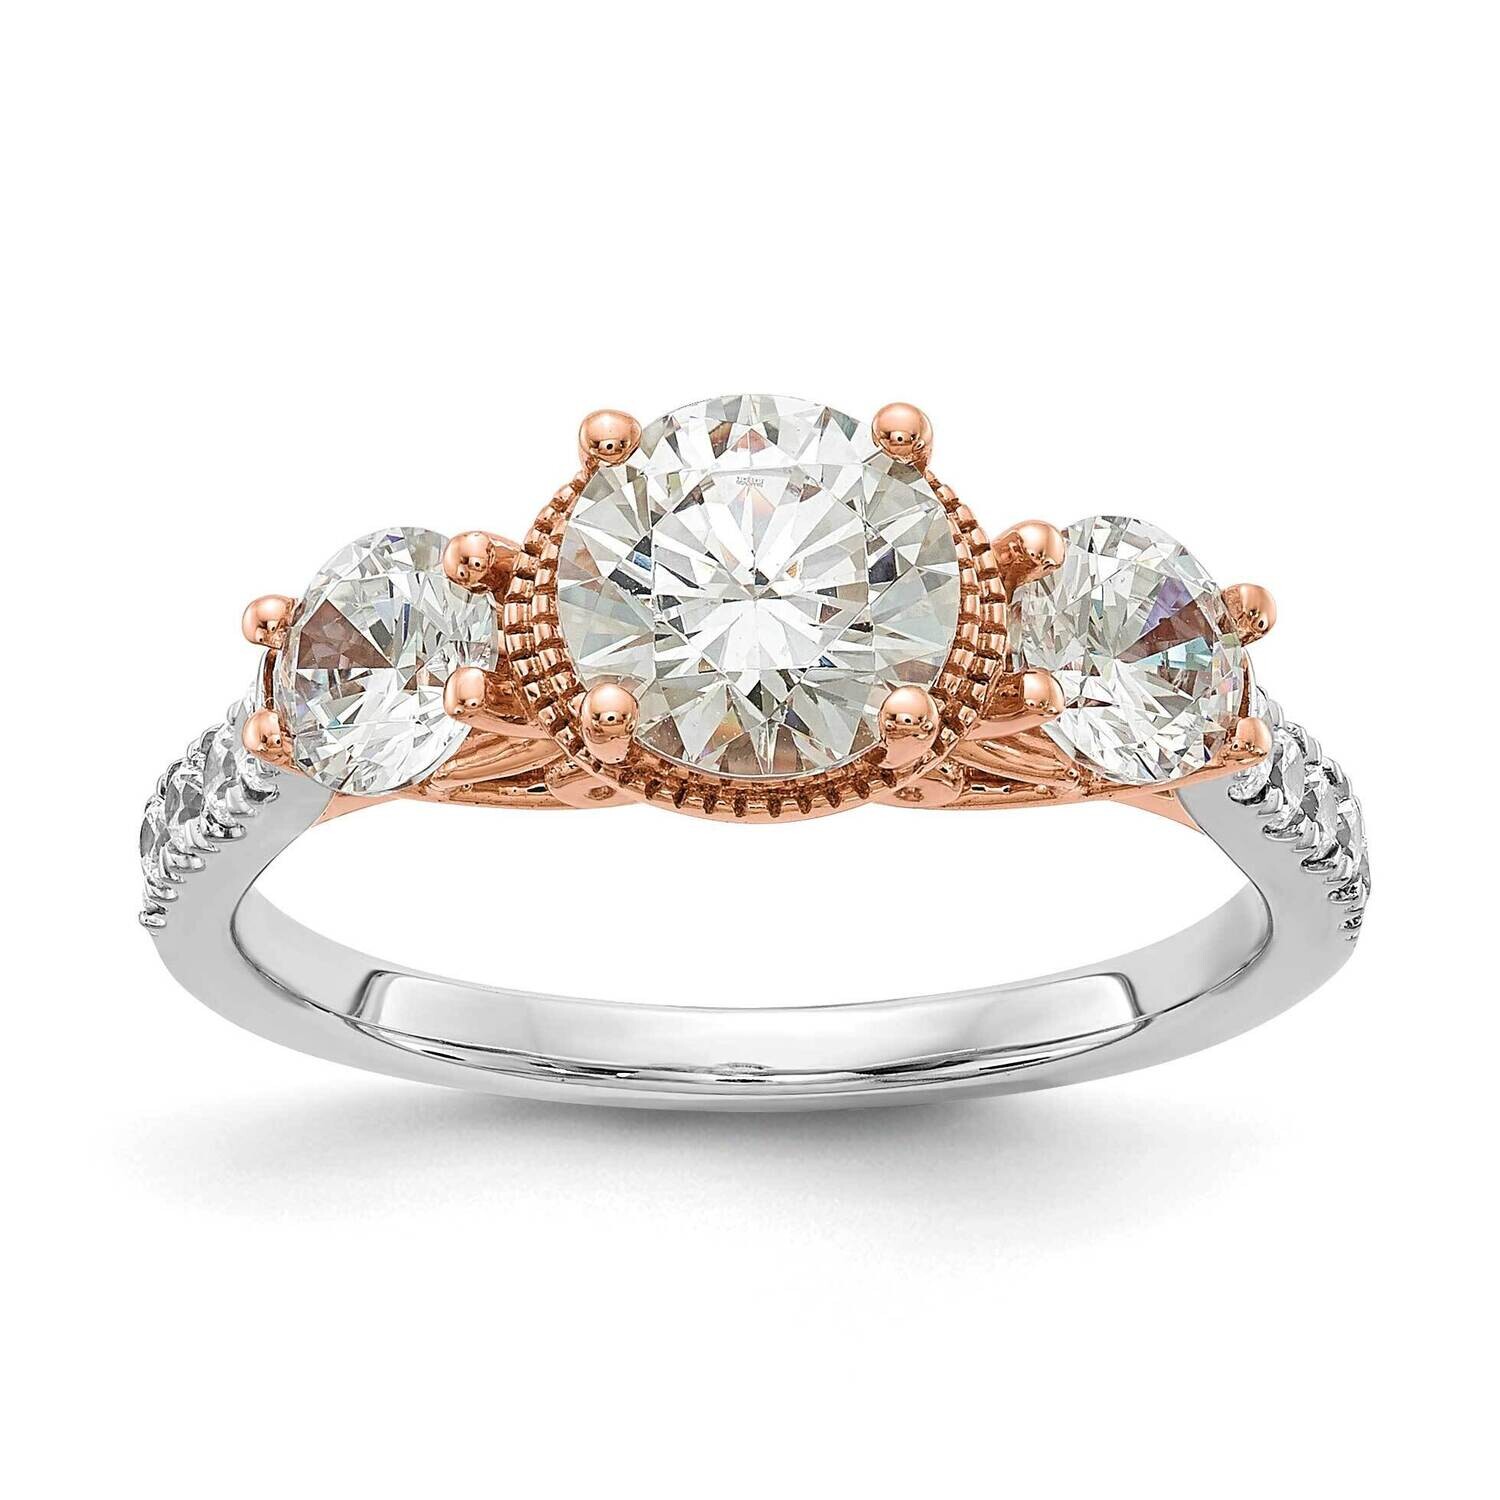 Rose Gold 3-Stone Holds 1 Carat 6.5mm Round Center 2-4.6mm Round Sides Diamond Semi-Mount Engagement Ring 14k White Gold RM6298E-100-WRAA